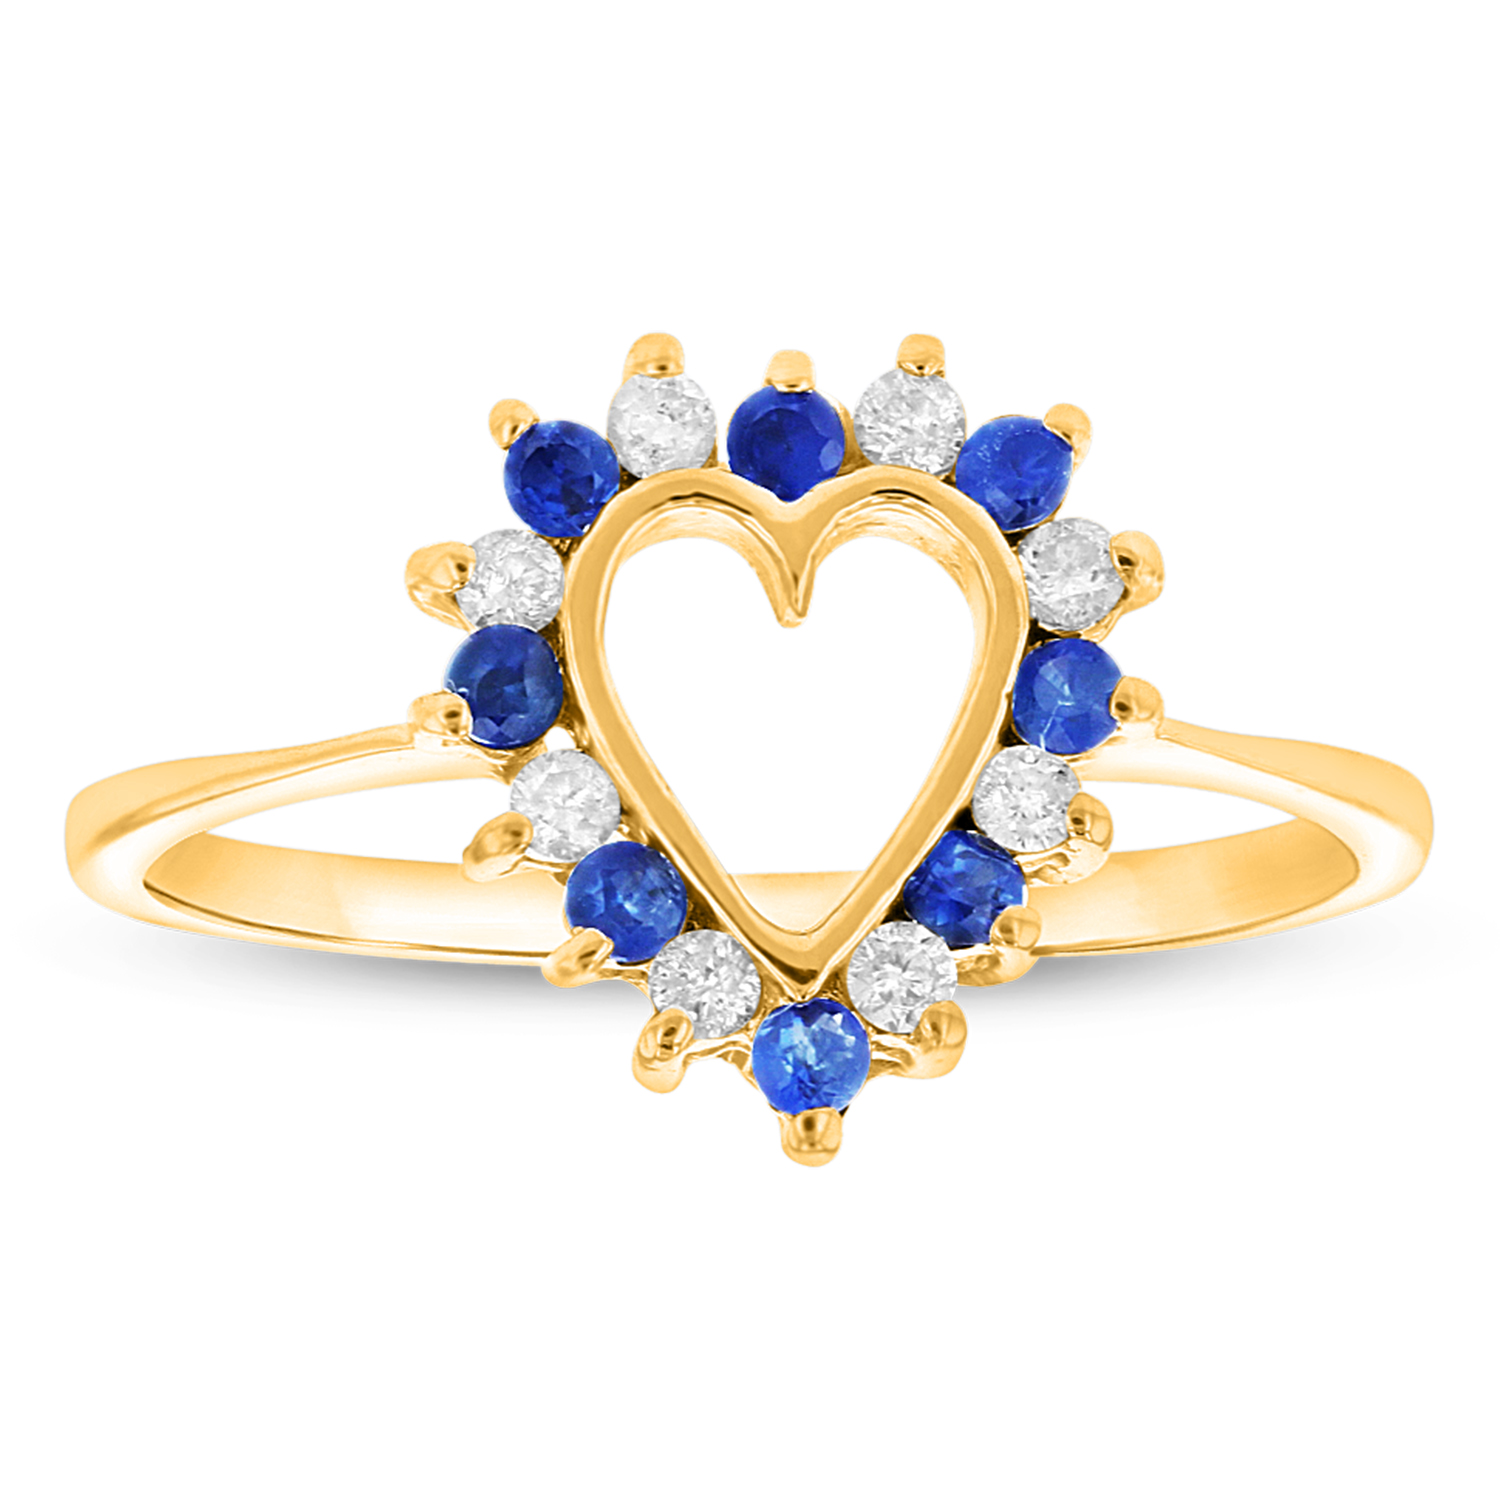 0.35ctw Diamond and Sapphire Heart Shaped Ring in 14k Yellow Gold